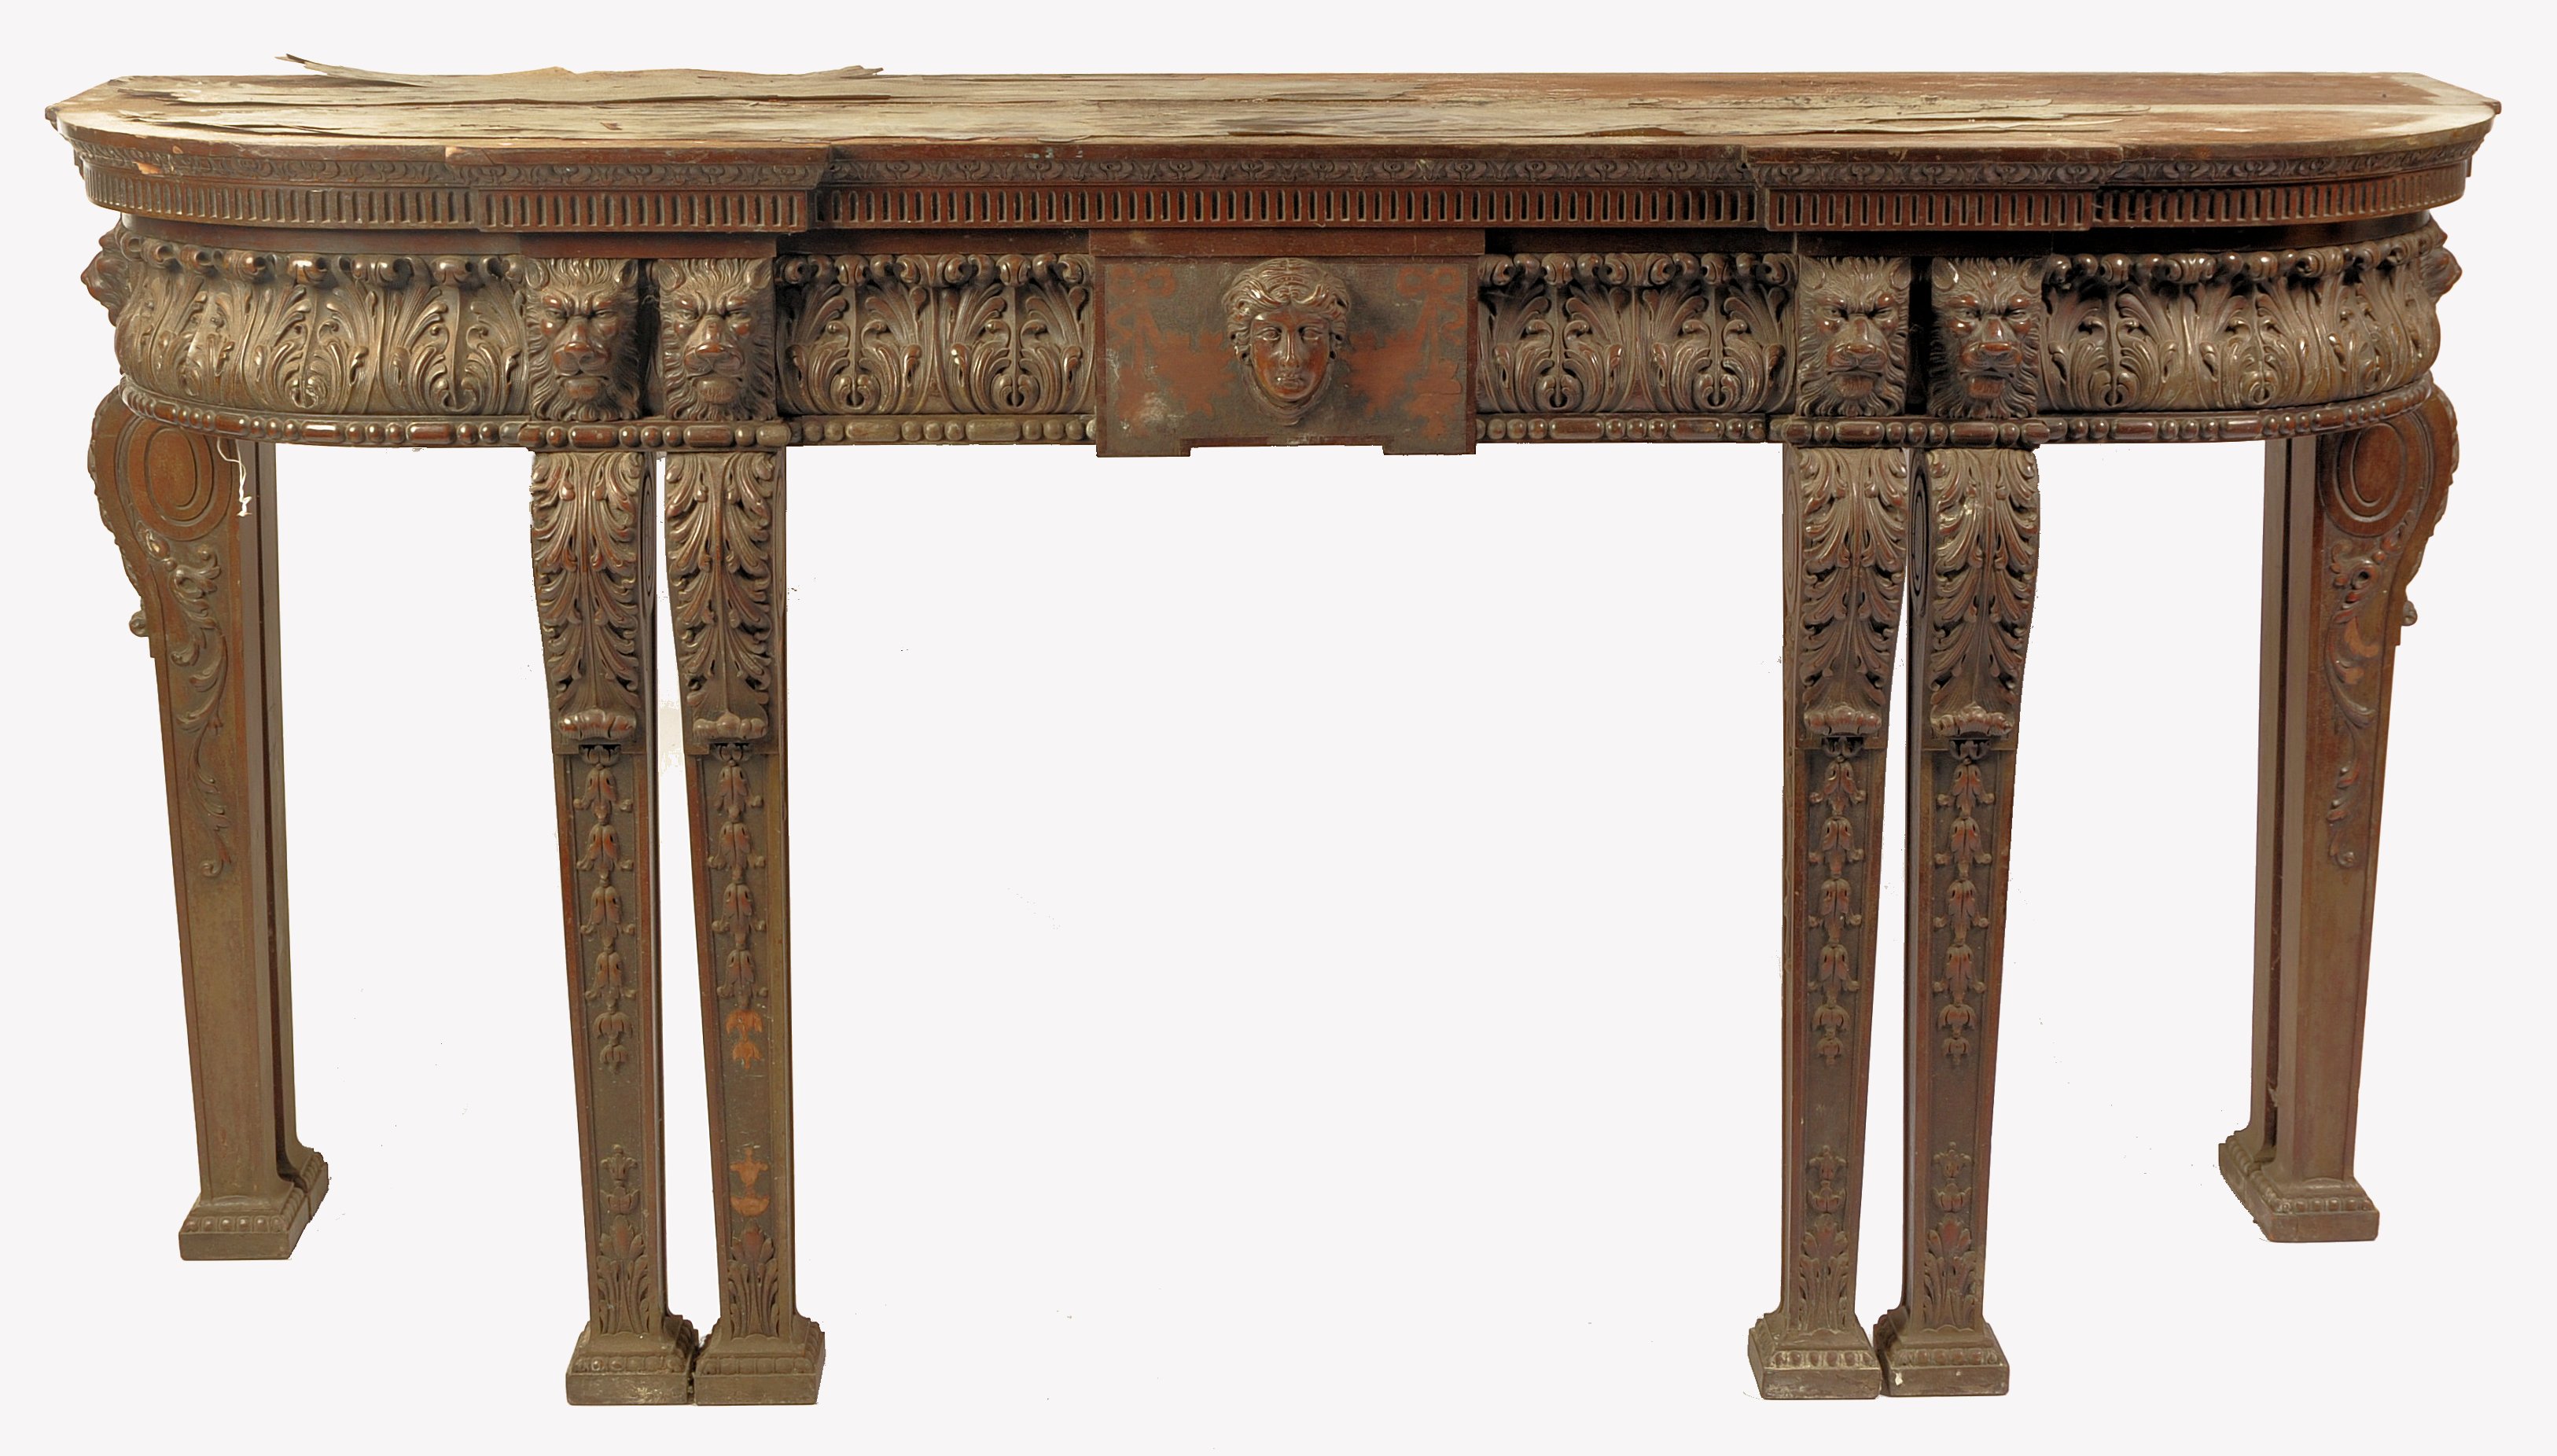 MANNER OF WILLIAM KENT, CIRCA 1760 GEORGE II PAIRED LEG SERVER TABLE